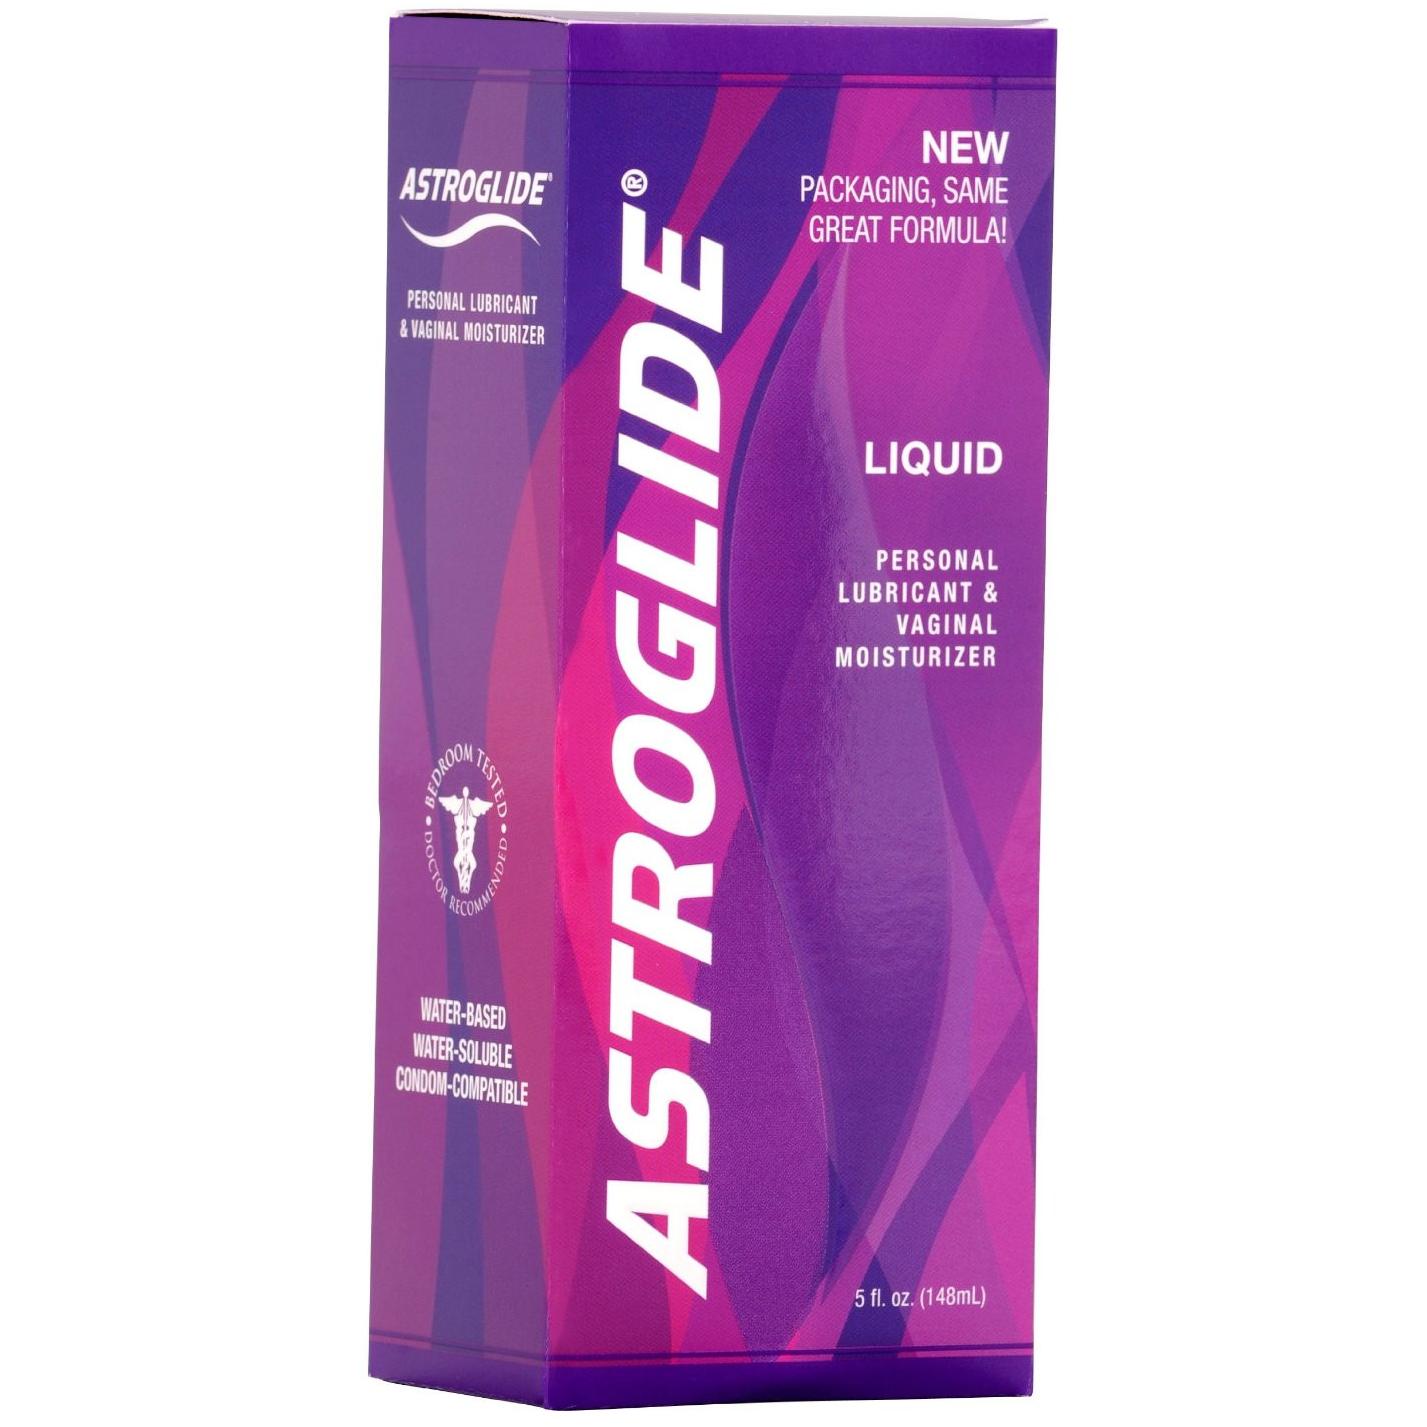 Astroglide Water-based Lubricant